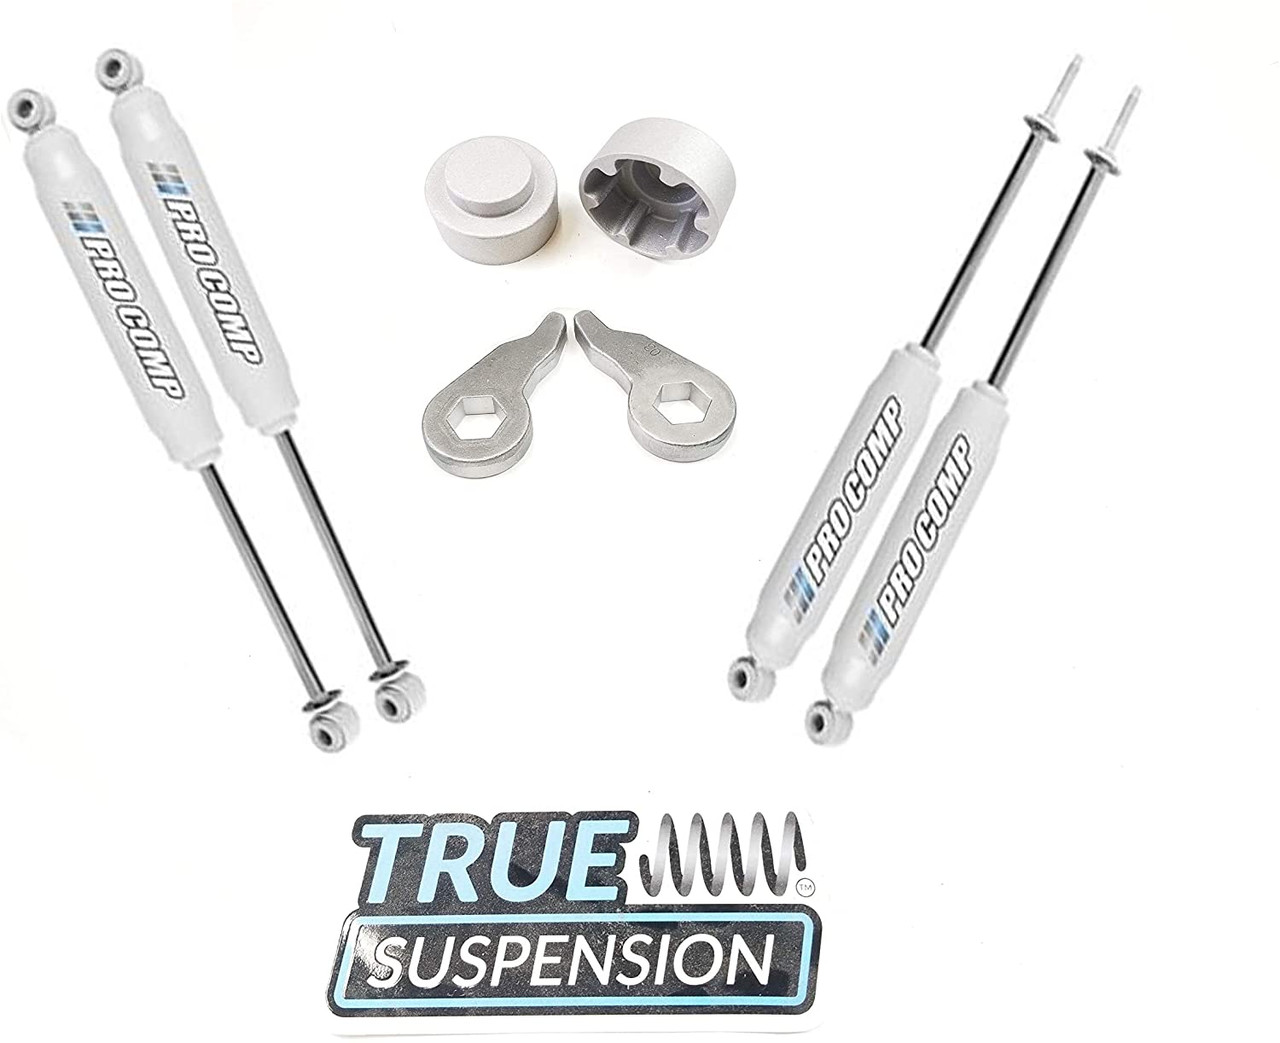 Compatible with Chevrolet GMC Suburban Avalanche Tahoe Yukon SUV 00-06 Lift kit Front Adjustable 1-3" Torsion Keys + 2" Lift Steel Spacers + Set of ProComp Es9000 Nitrogen Charged Shocks Kit 2WD